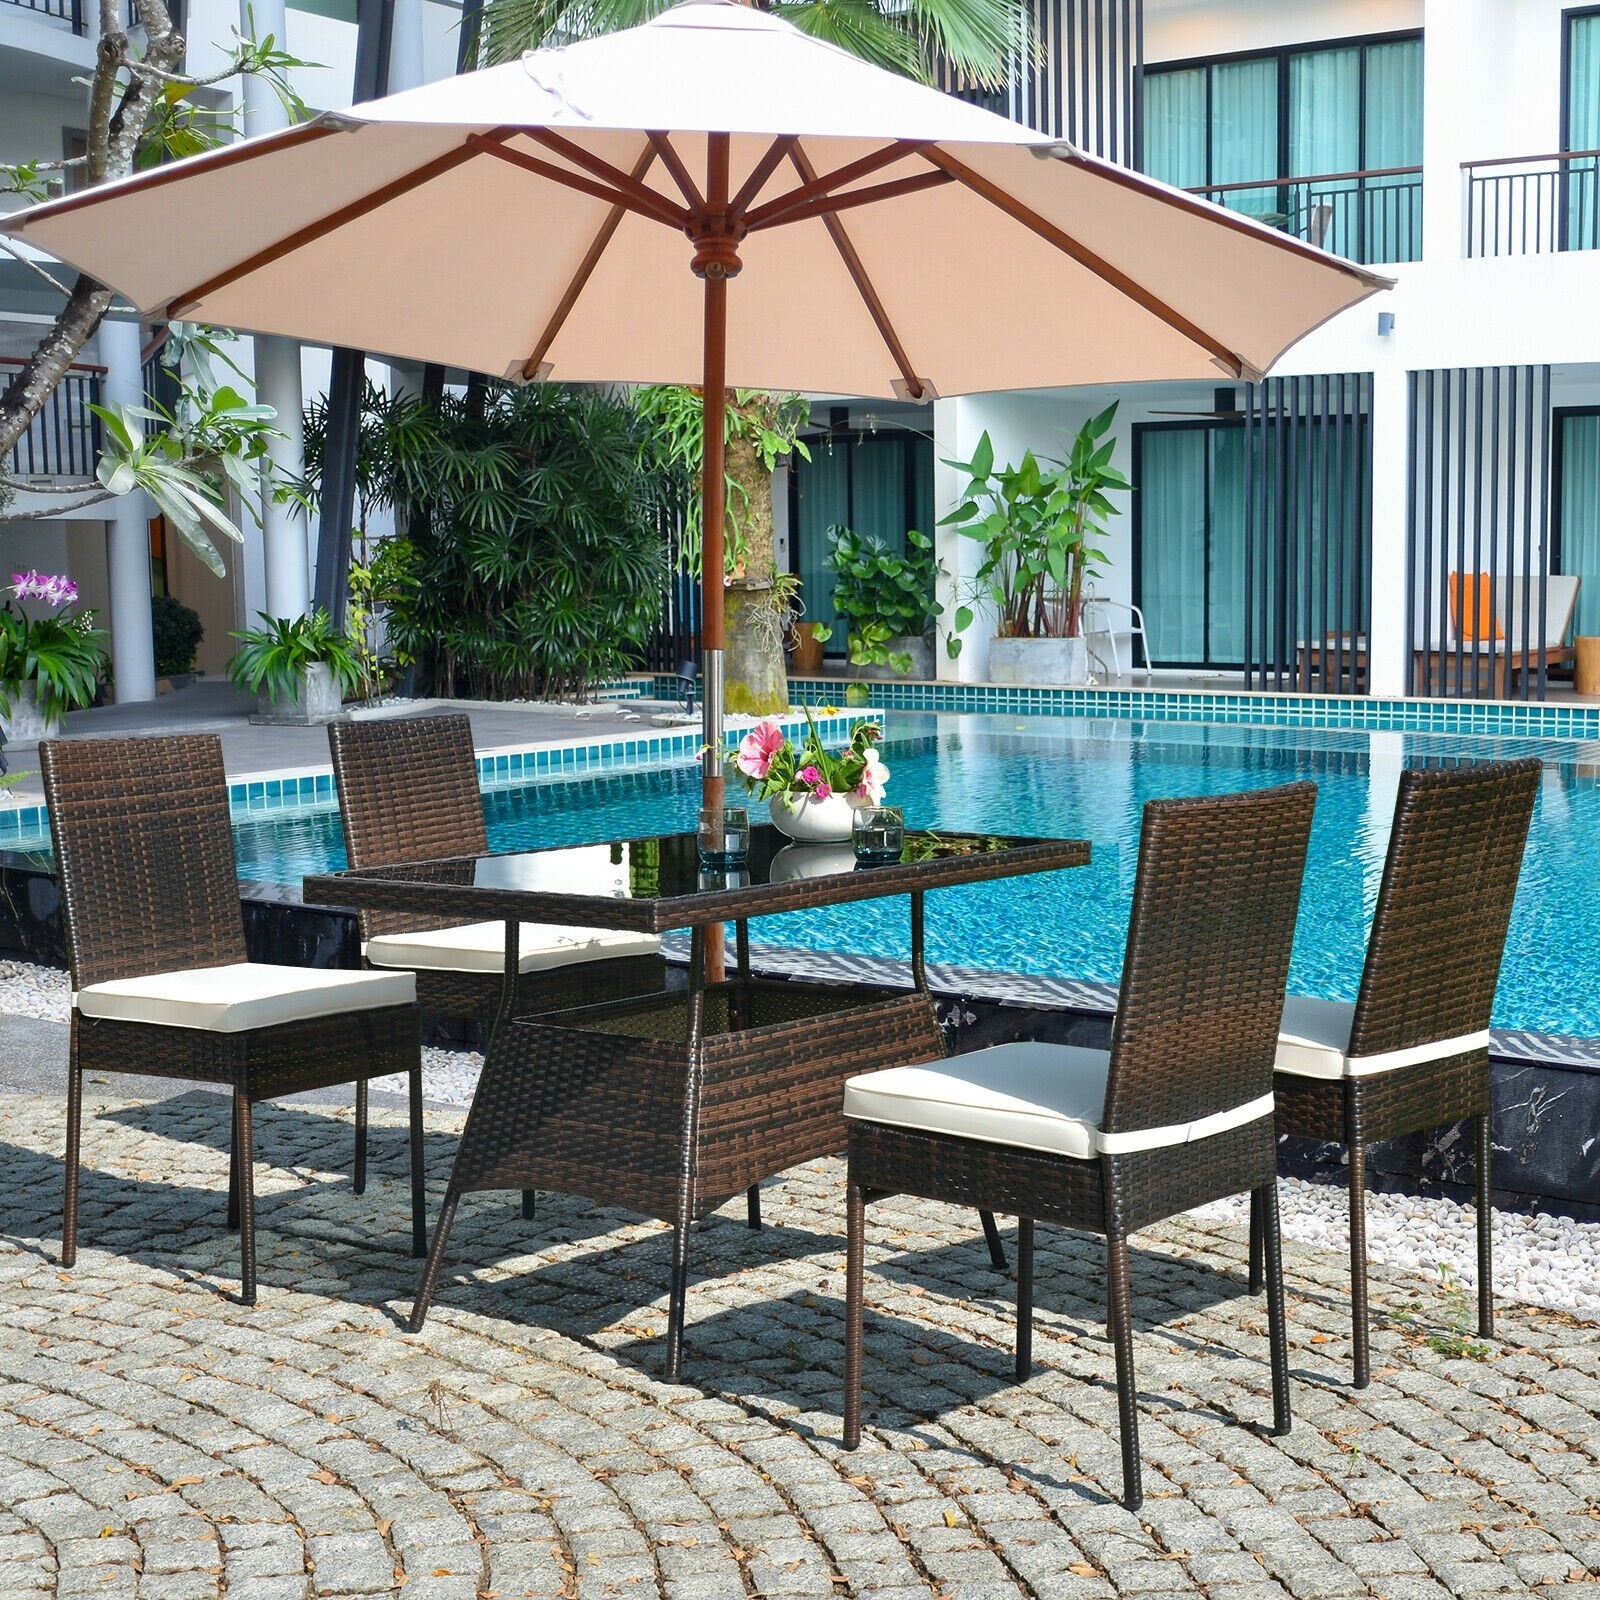 5 Pcs Rattan Dining Set Glass Table High Back Chair, Brown - Gallery Canada